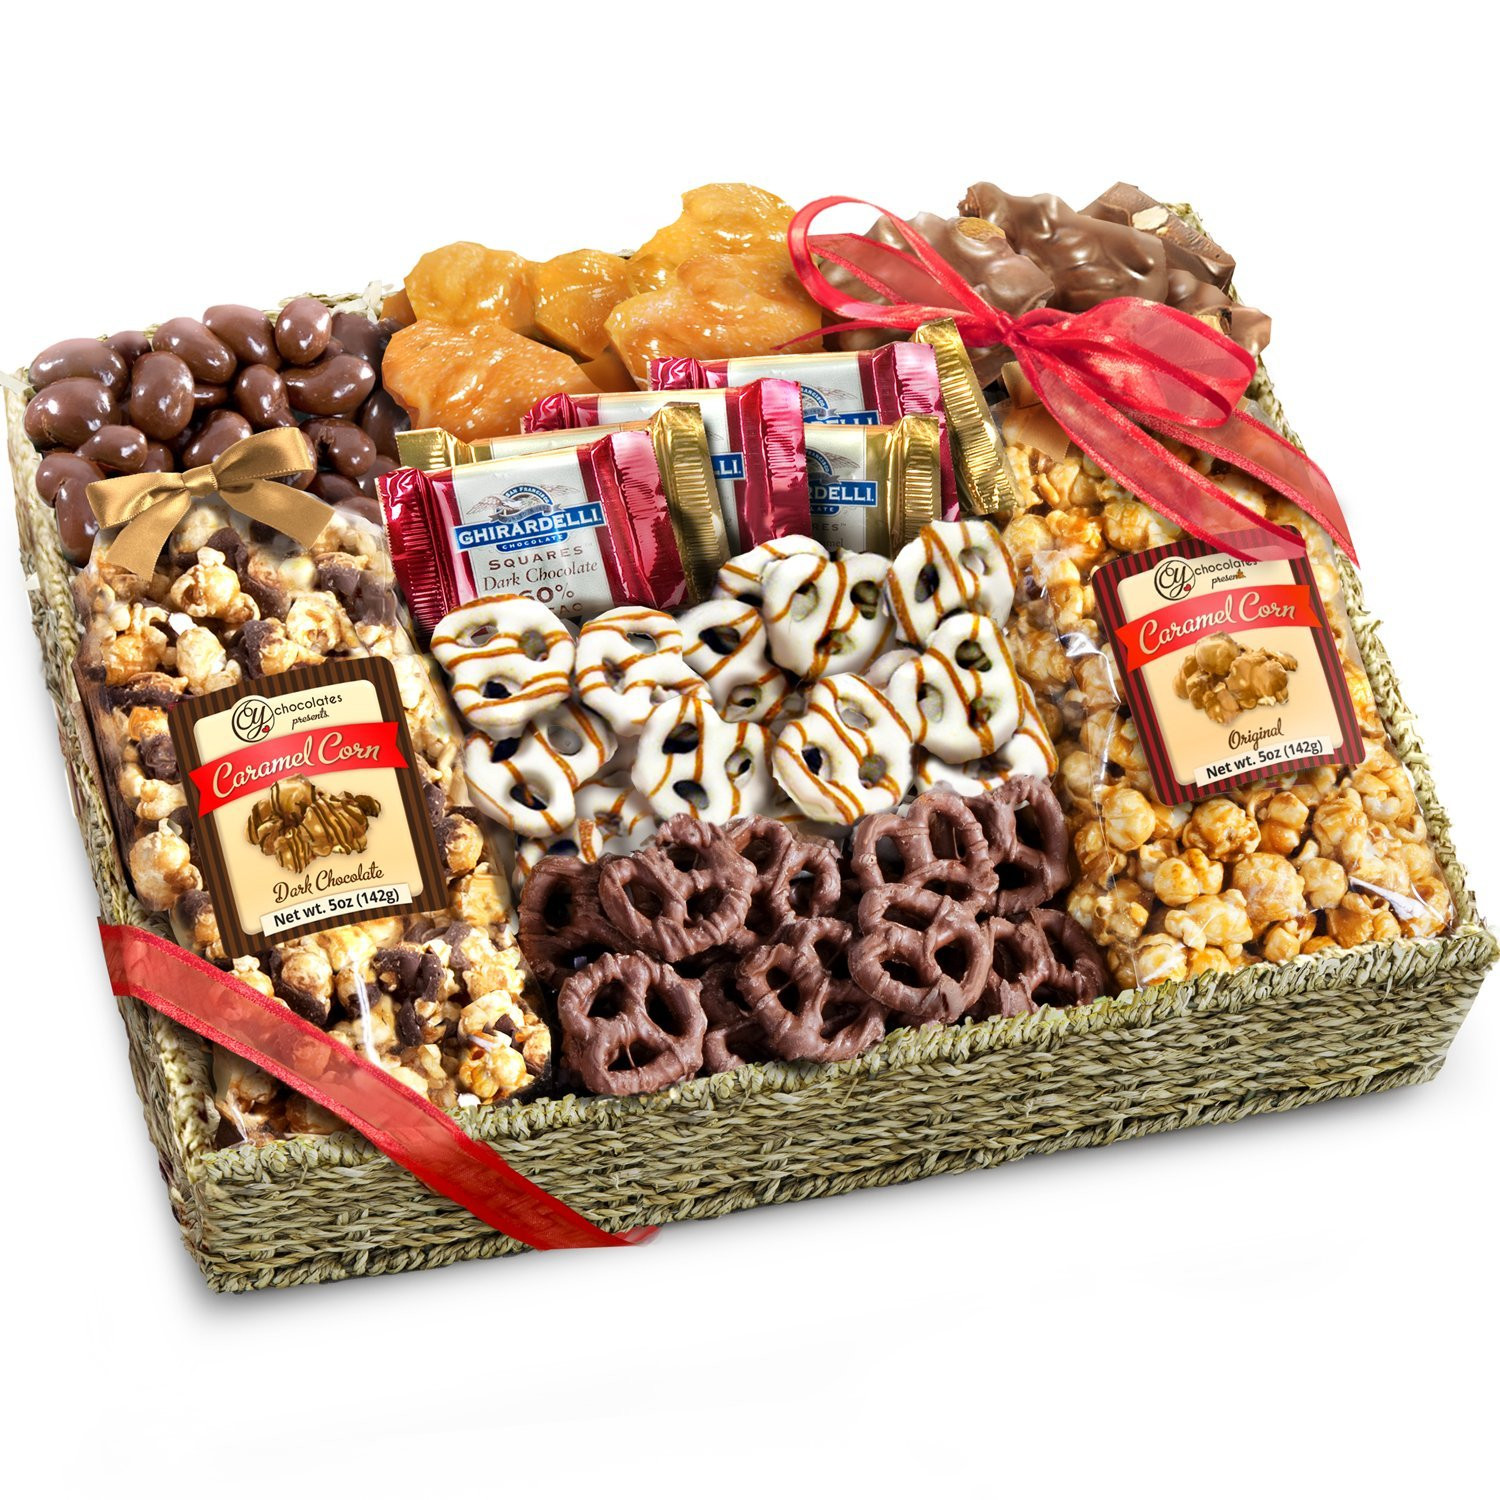 Food Gift Basket Ideas
 Cookie Gift Boxes & Baskets Best Holiday Treats Snacks